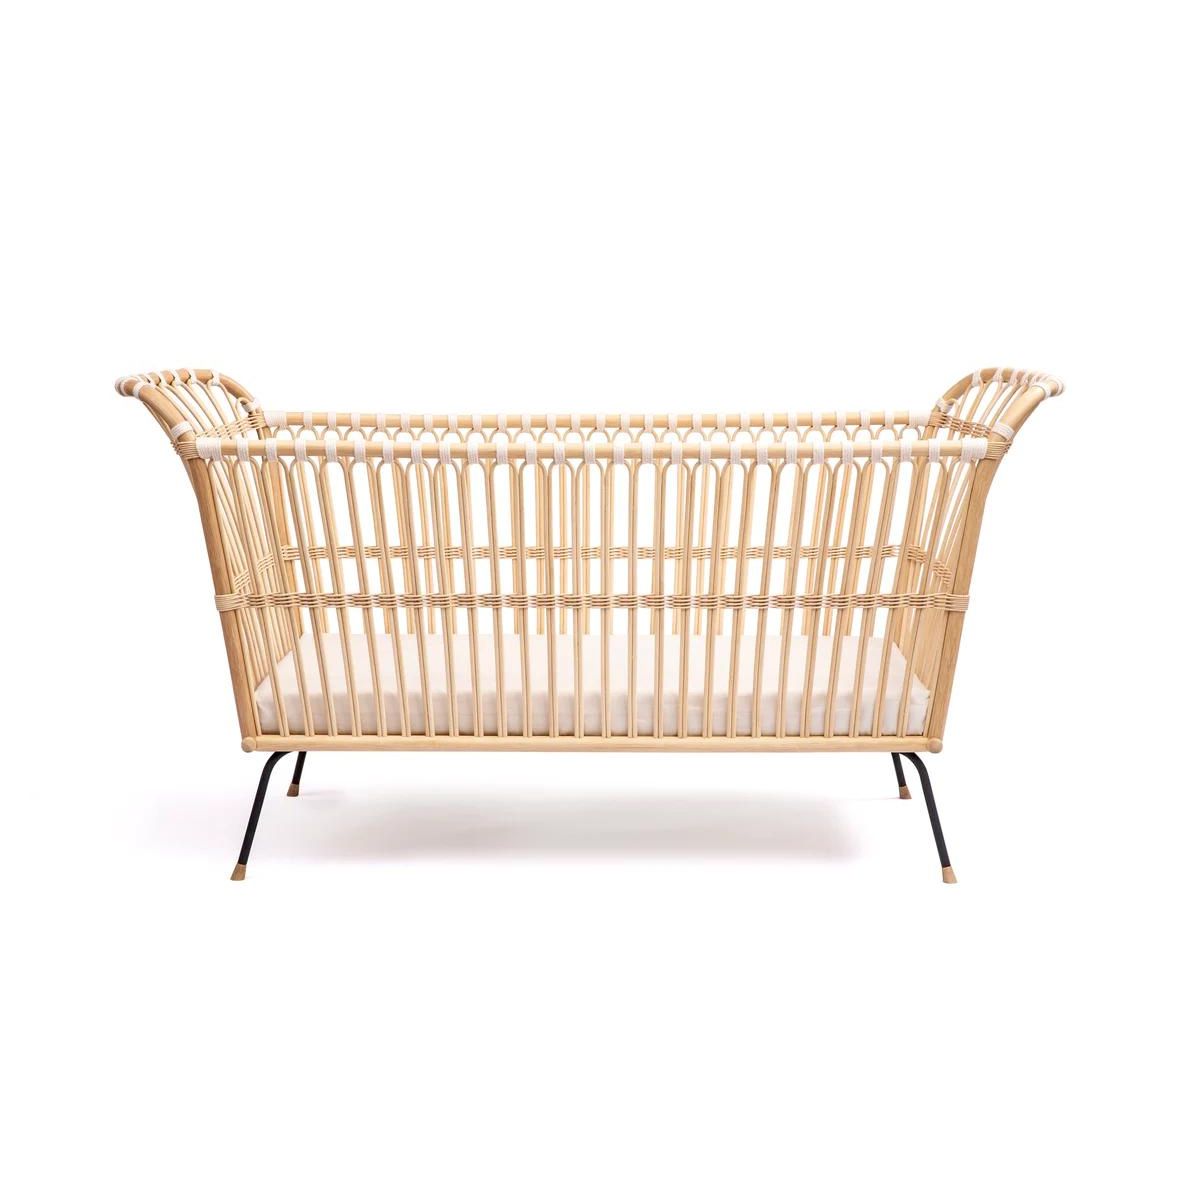 Bermbach Handcrafted Frederick Vegan Crib The Archive Store Baby Cribs Eco-friendly Beds Nursery